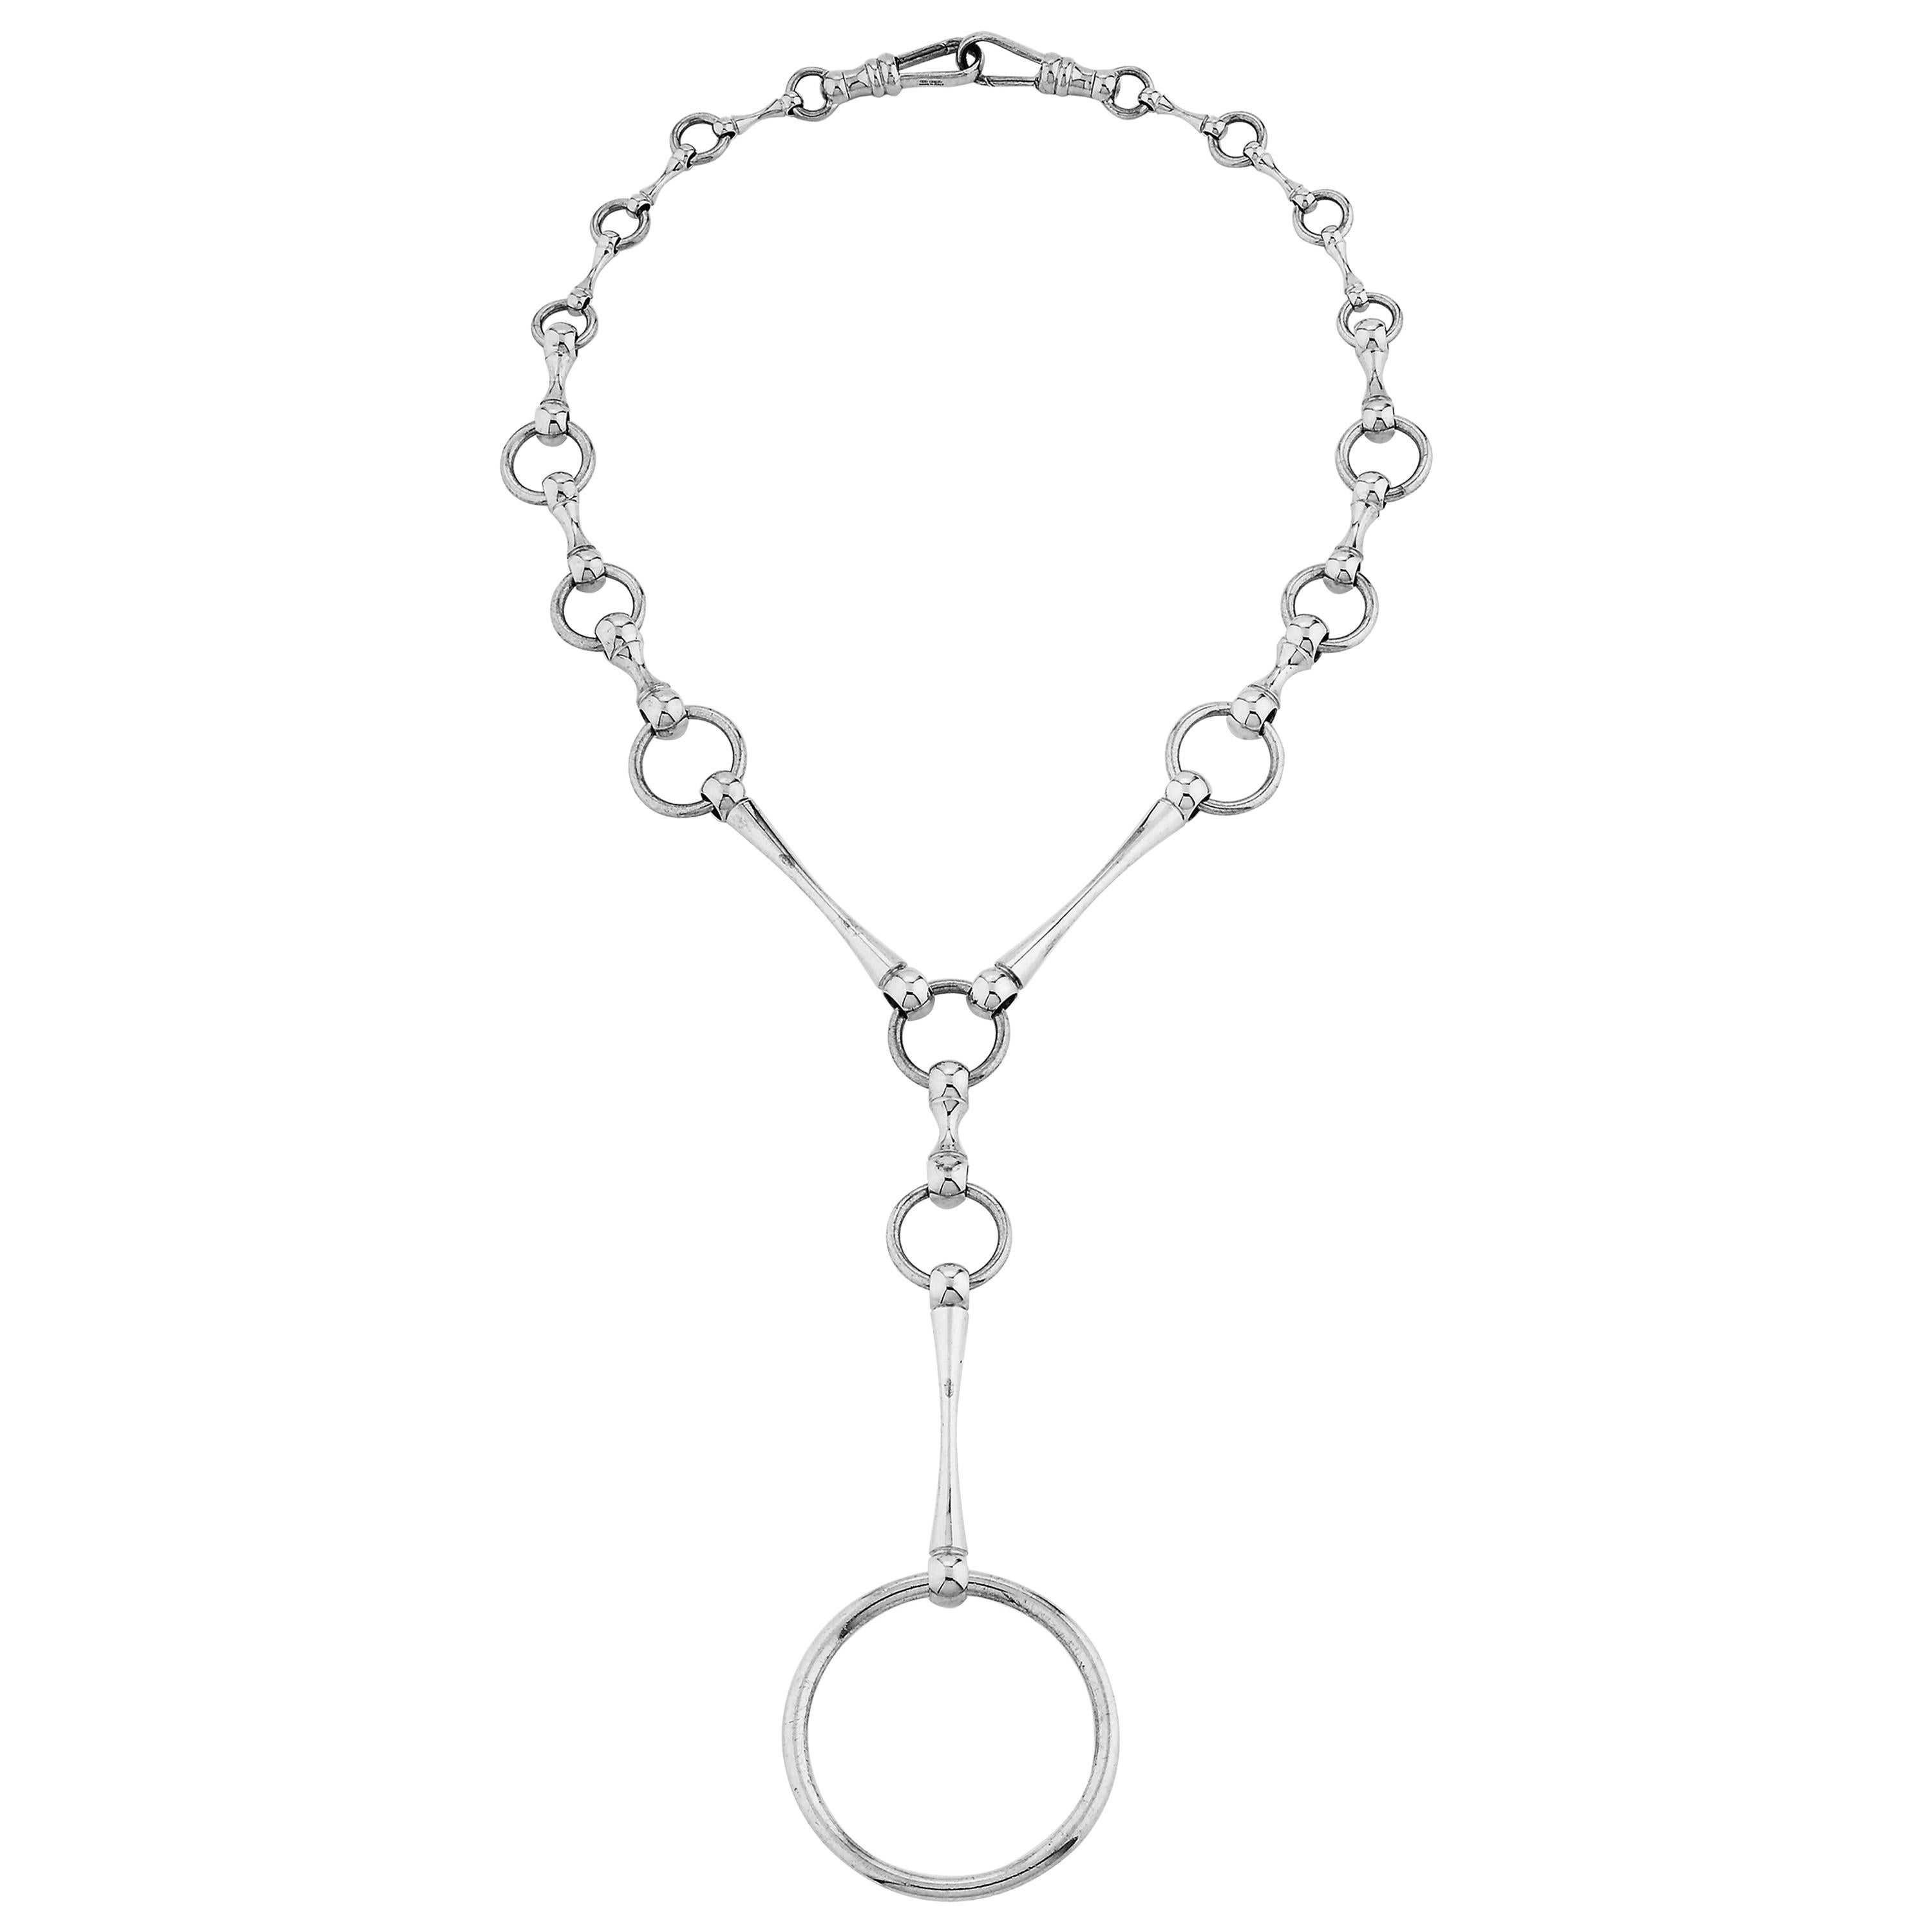 Betony Vernon "Love Lock Necklace" Woman Necklace Sterling Silver 925 in Stock For Sale